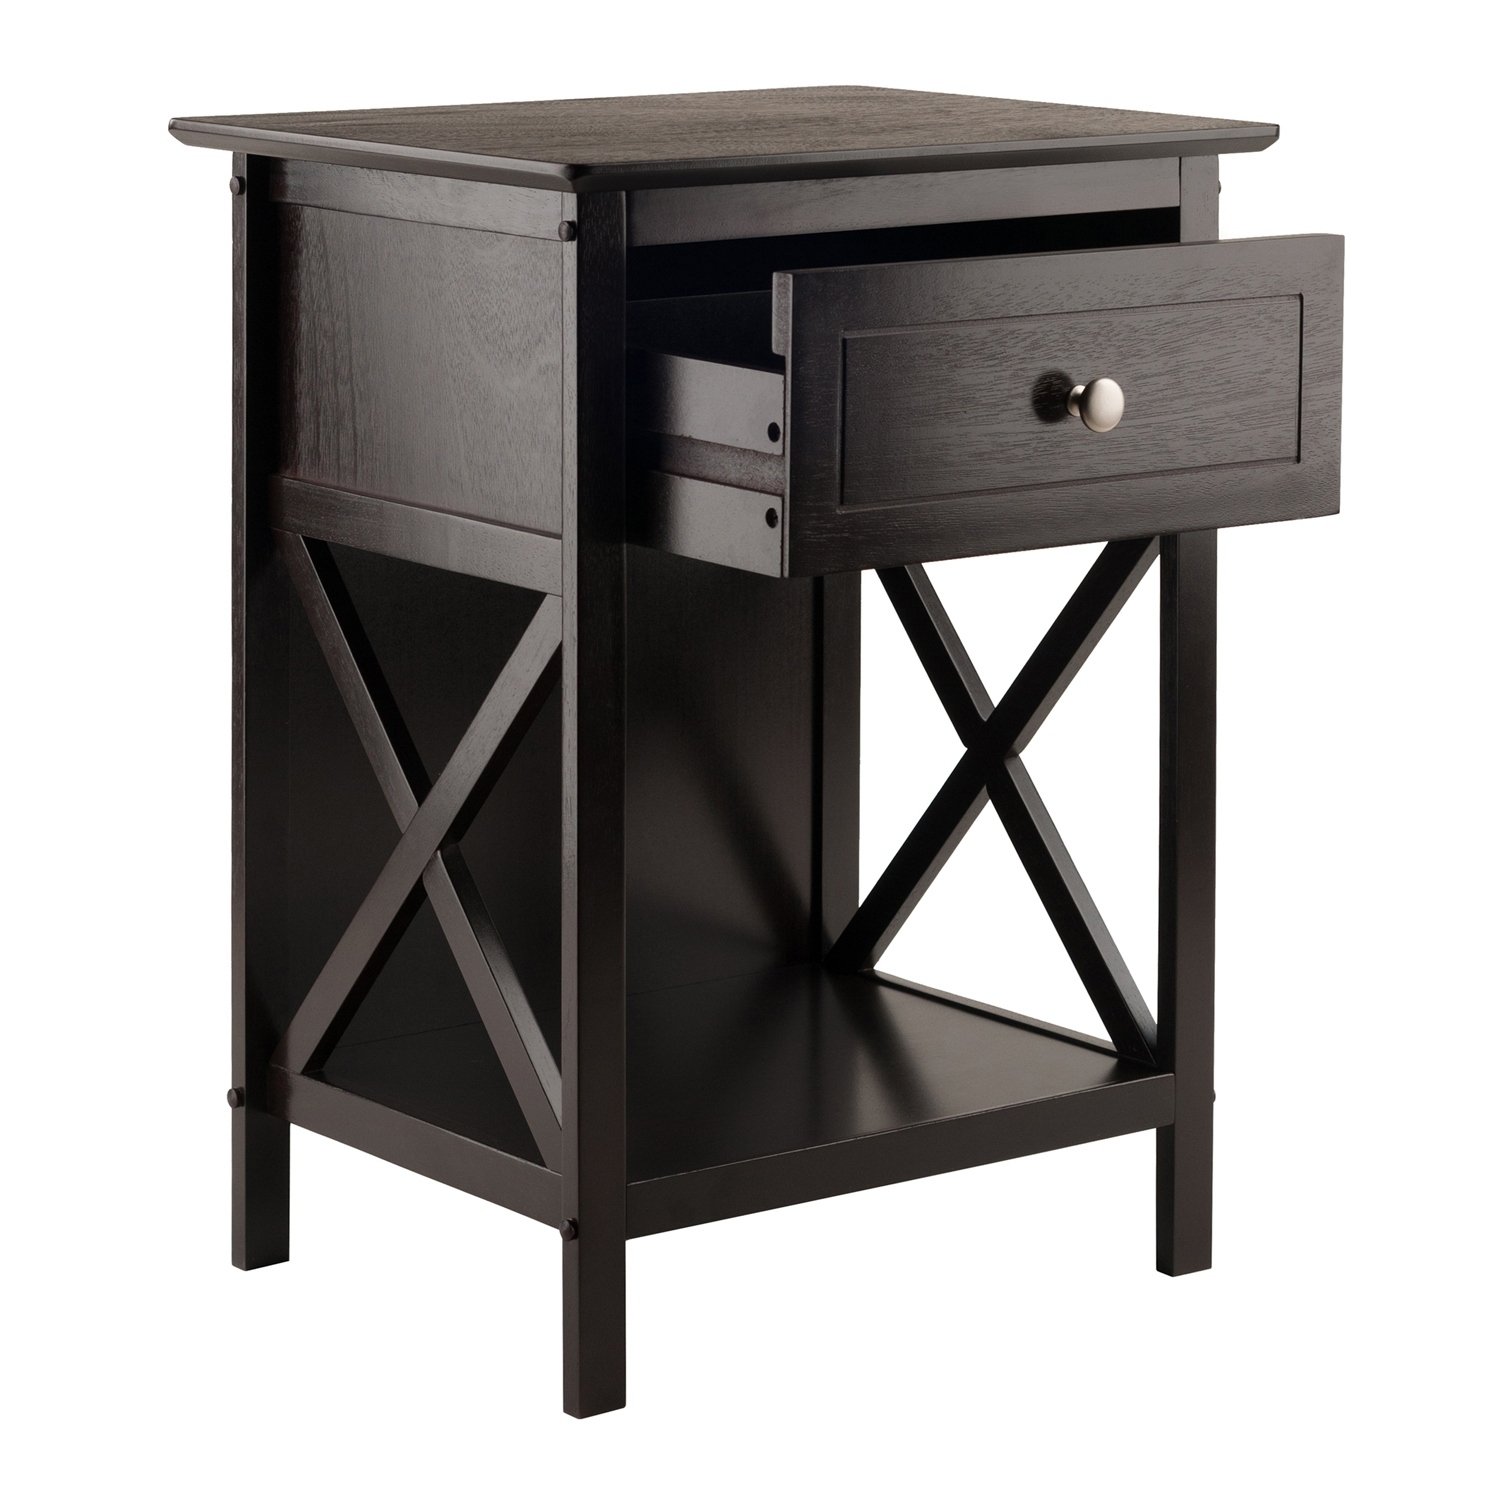 winsome xylia solid and composite wood accent table coffee finish squamish with drawer espresso free shipping today round concrete outdoor dining danish modern furniture black